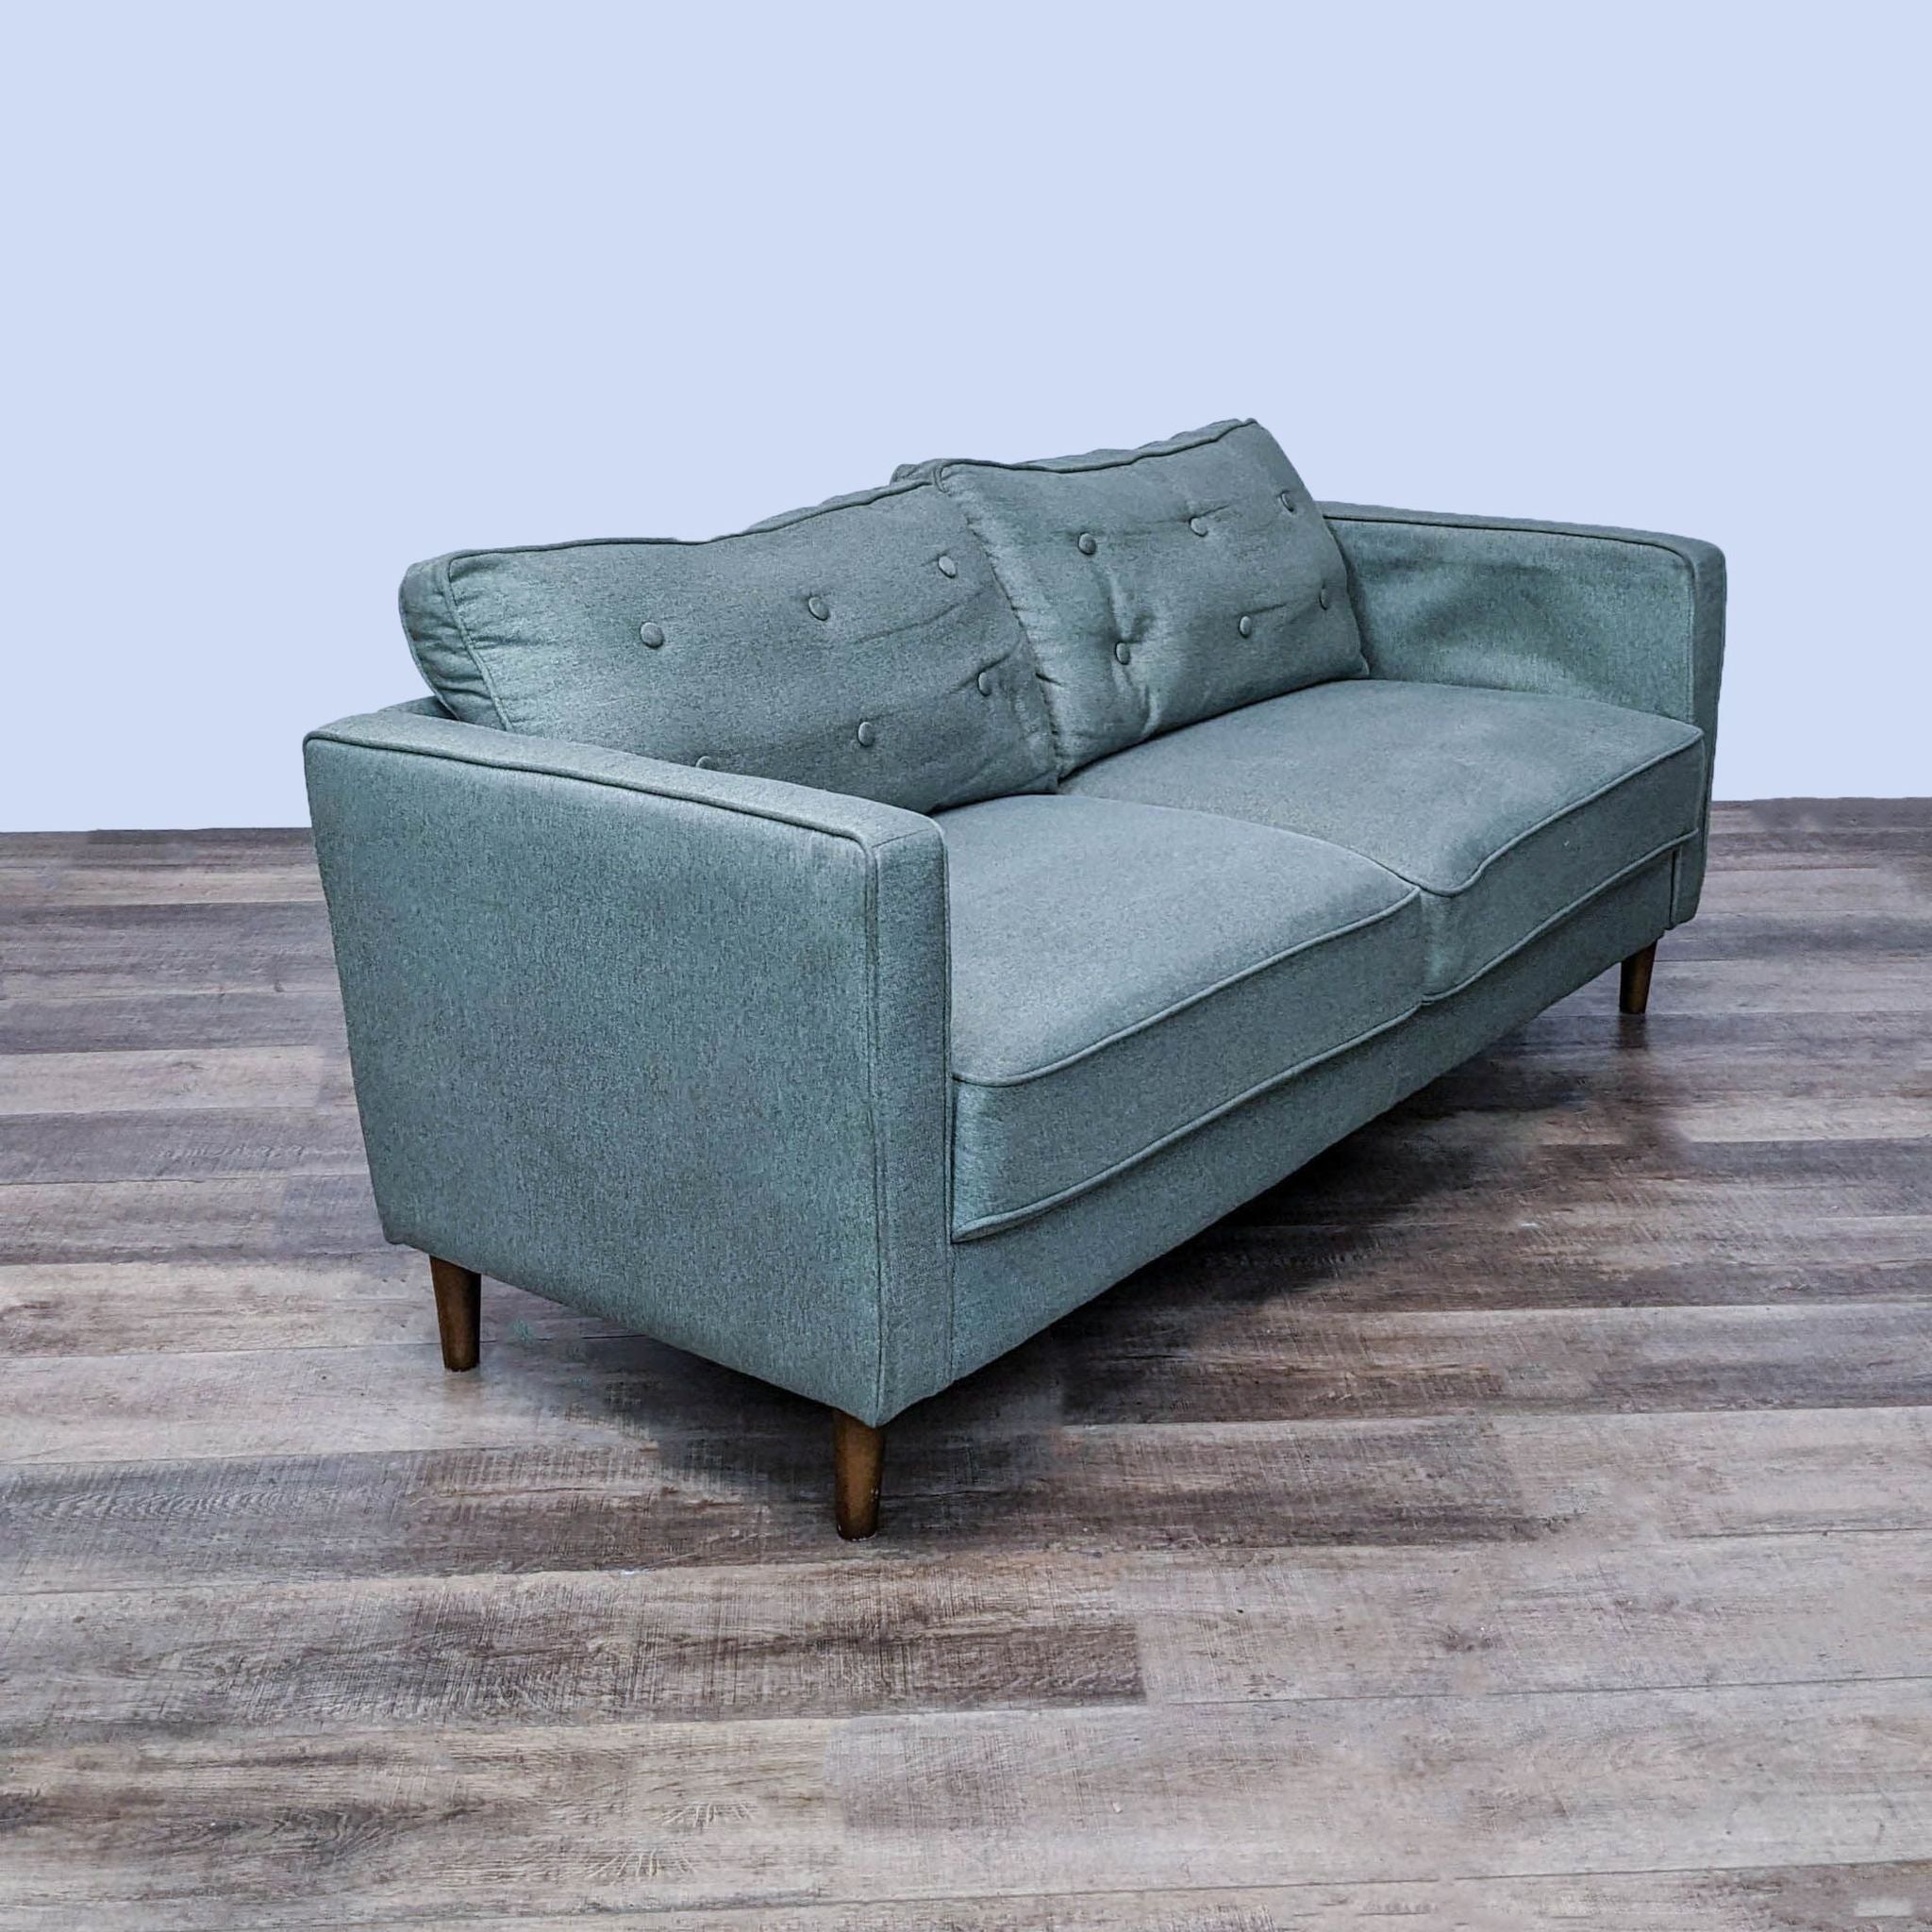 Front angle view of Zinus 3-seat sofa showcasing buttoned upholstery and piped edges in a minimalistic setting.